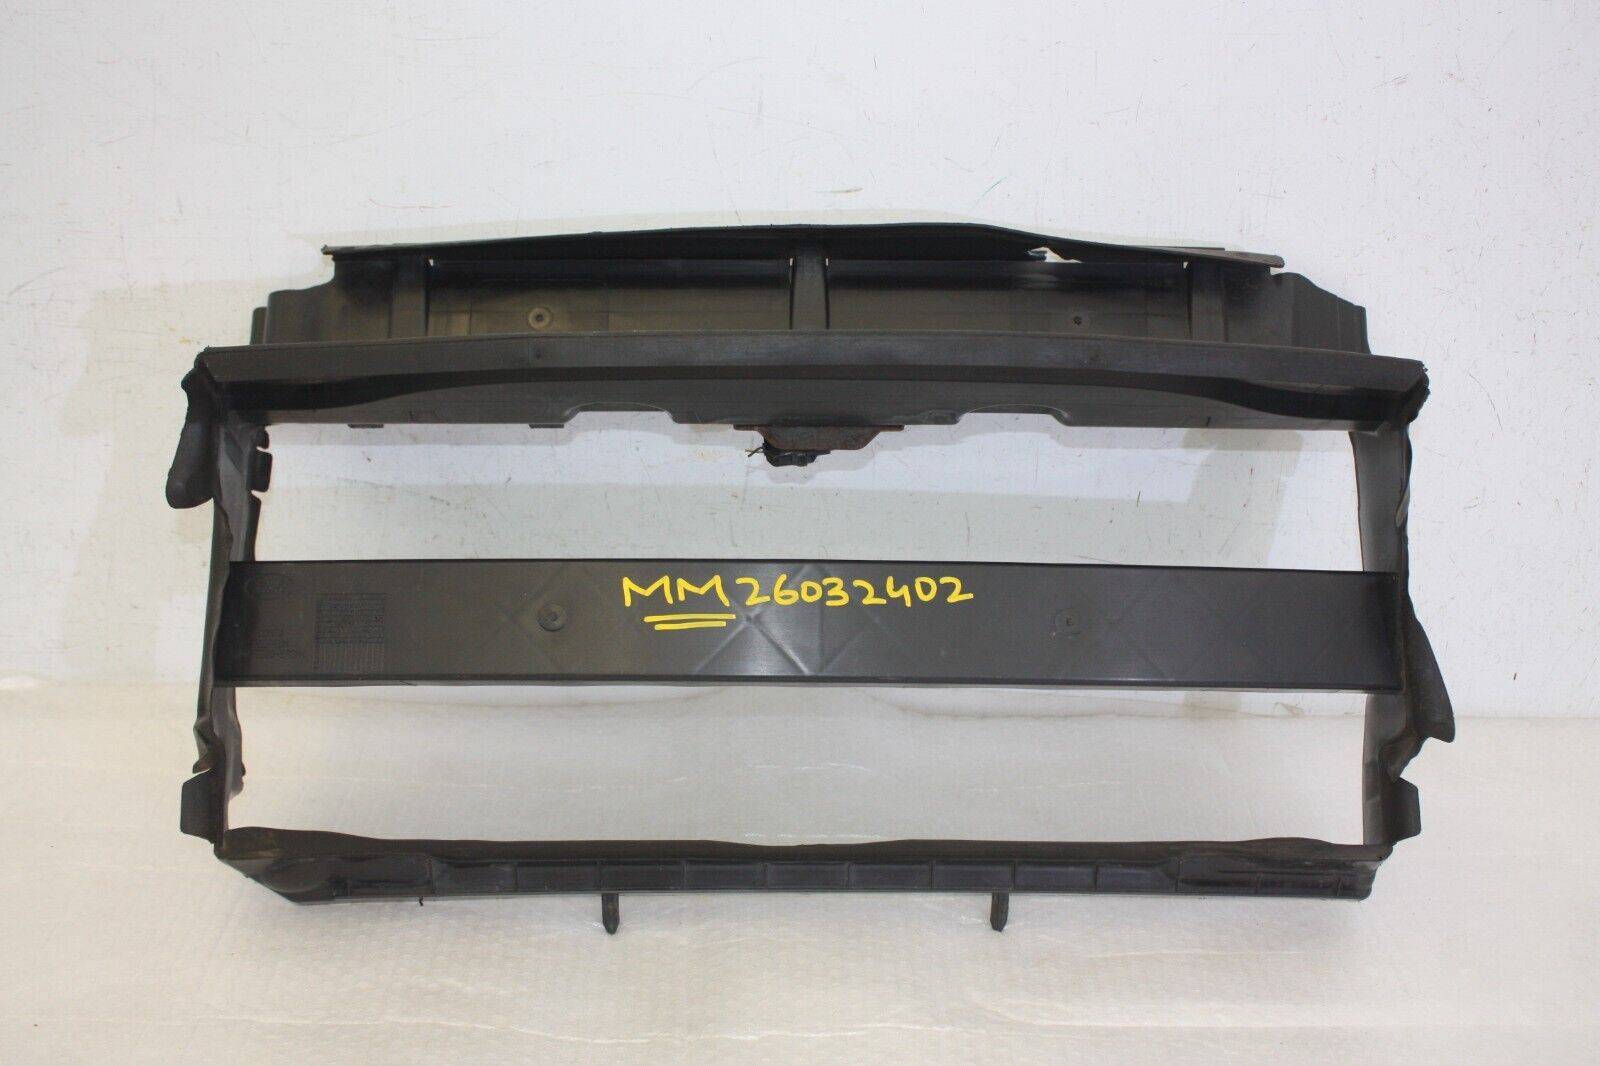 Land Rover Discovery Radiator Air Duct Panel 2009 TO 2013 FH22 019A01 AB Genuine 176305878918